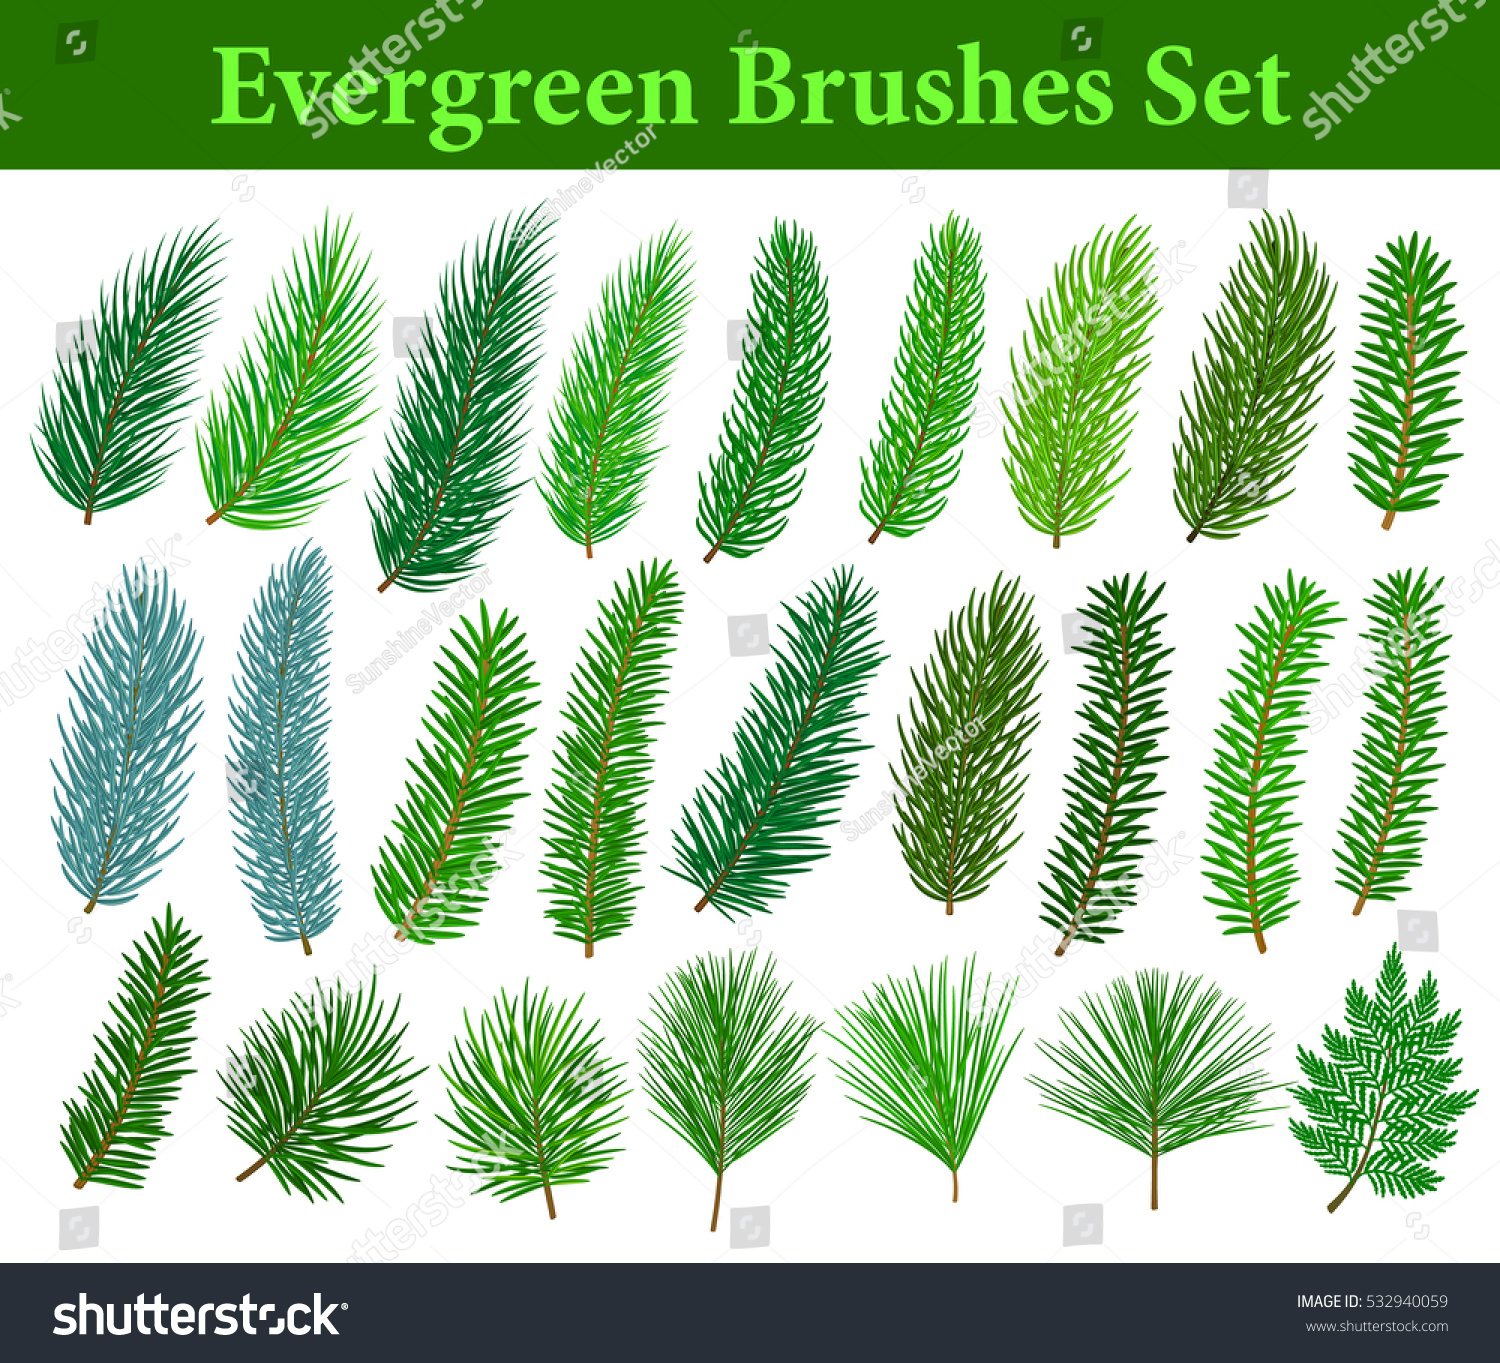 Collection Evergreen Coniferous Trees Branches Brushes Stock Vector